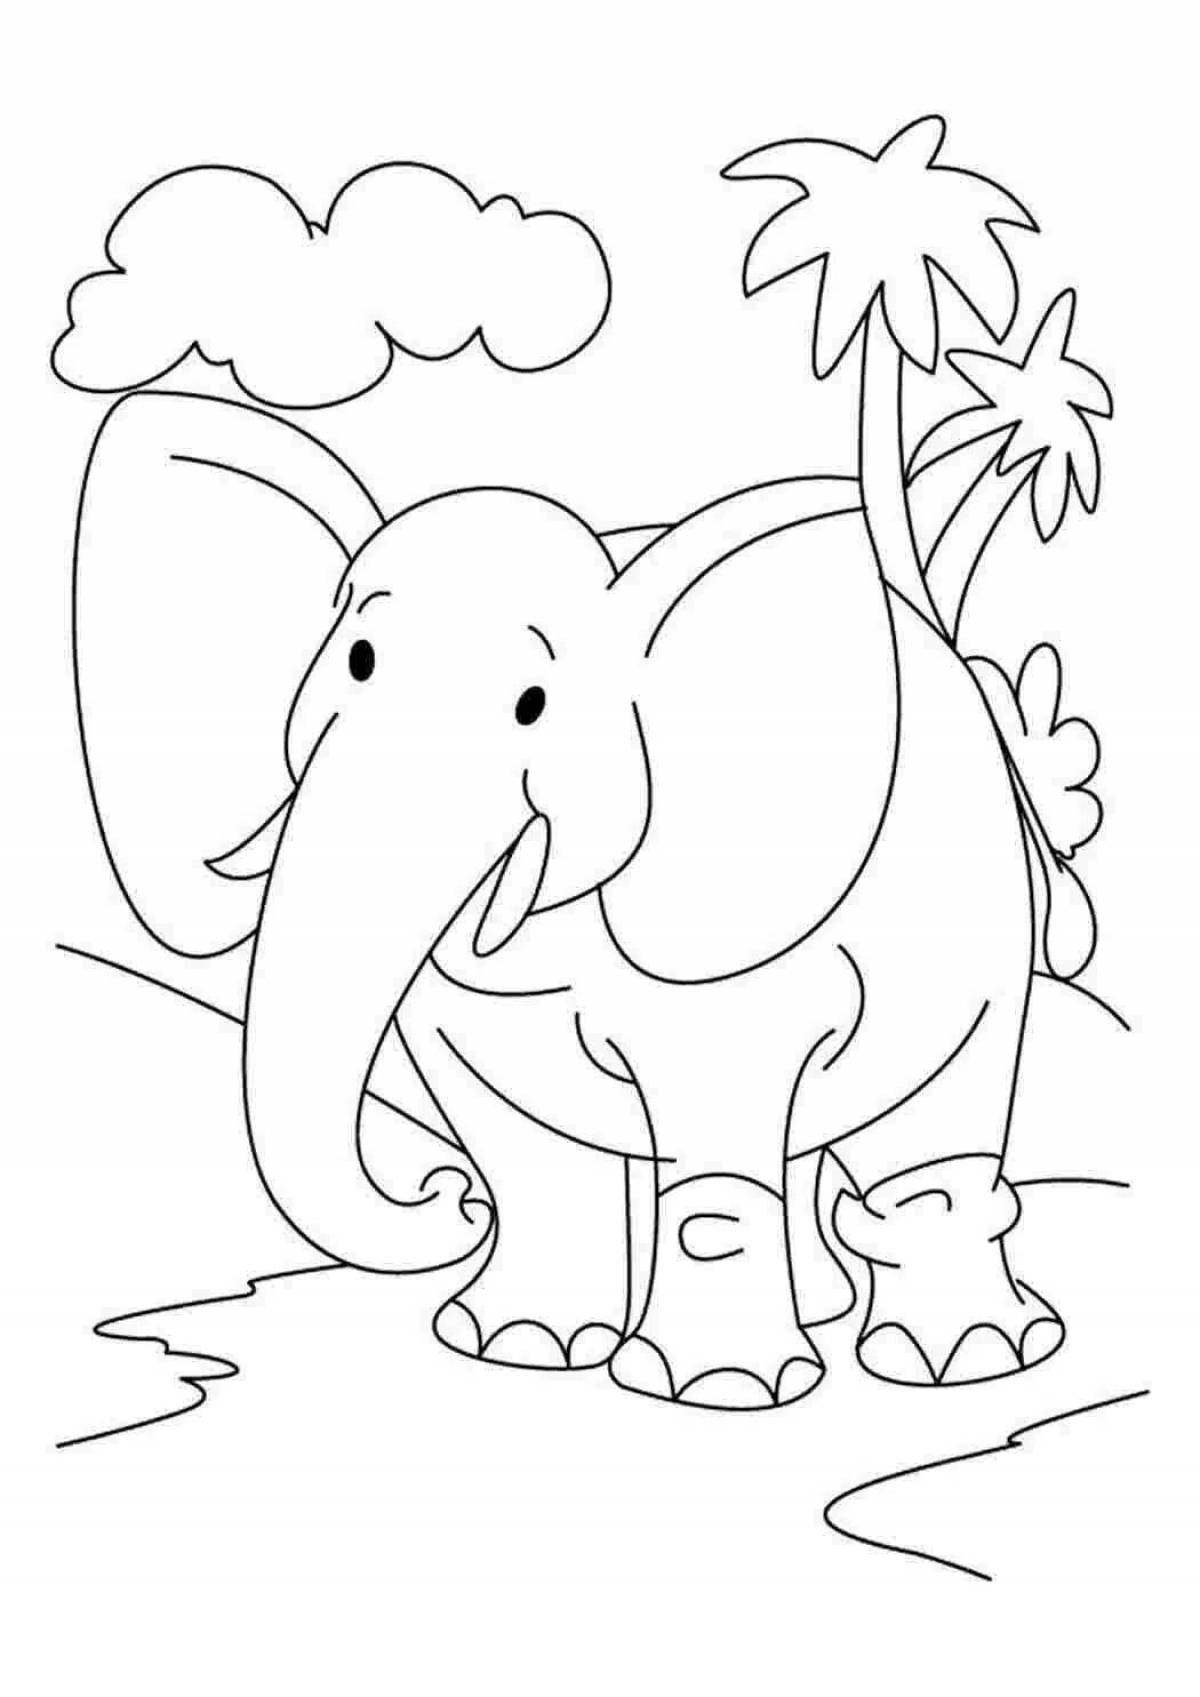 Exciting elephant coloring book for kids